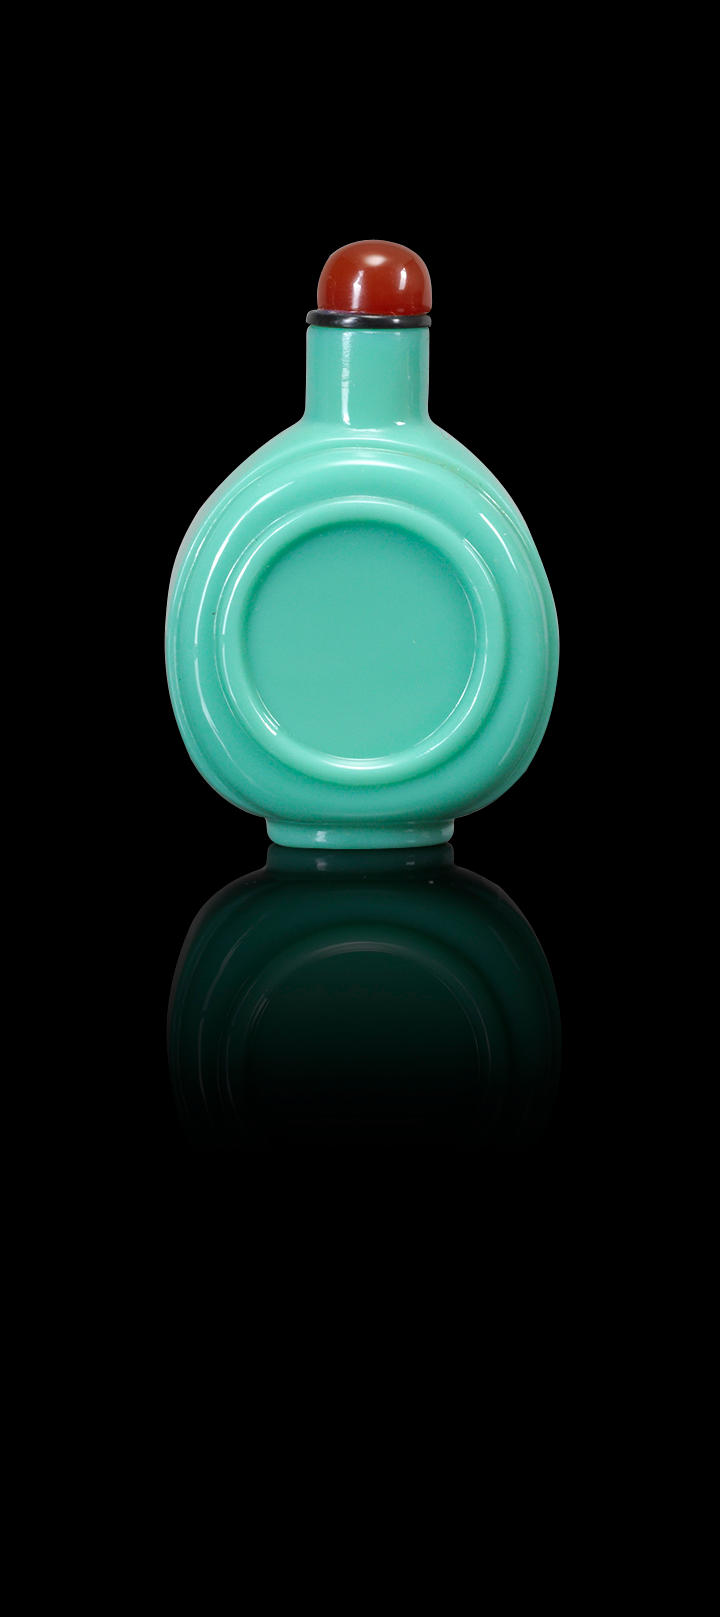 A turquoise-green glass snuff bottle